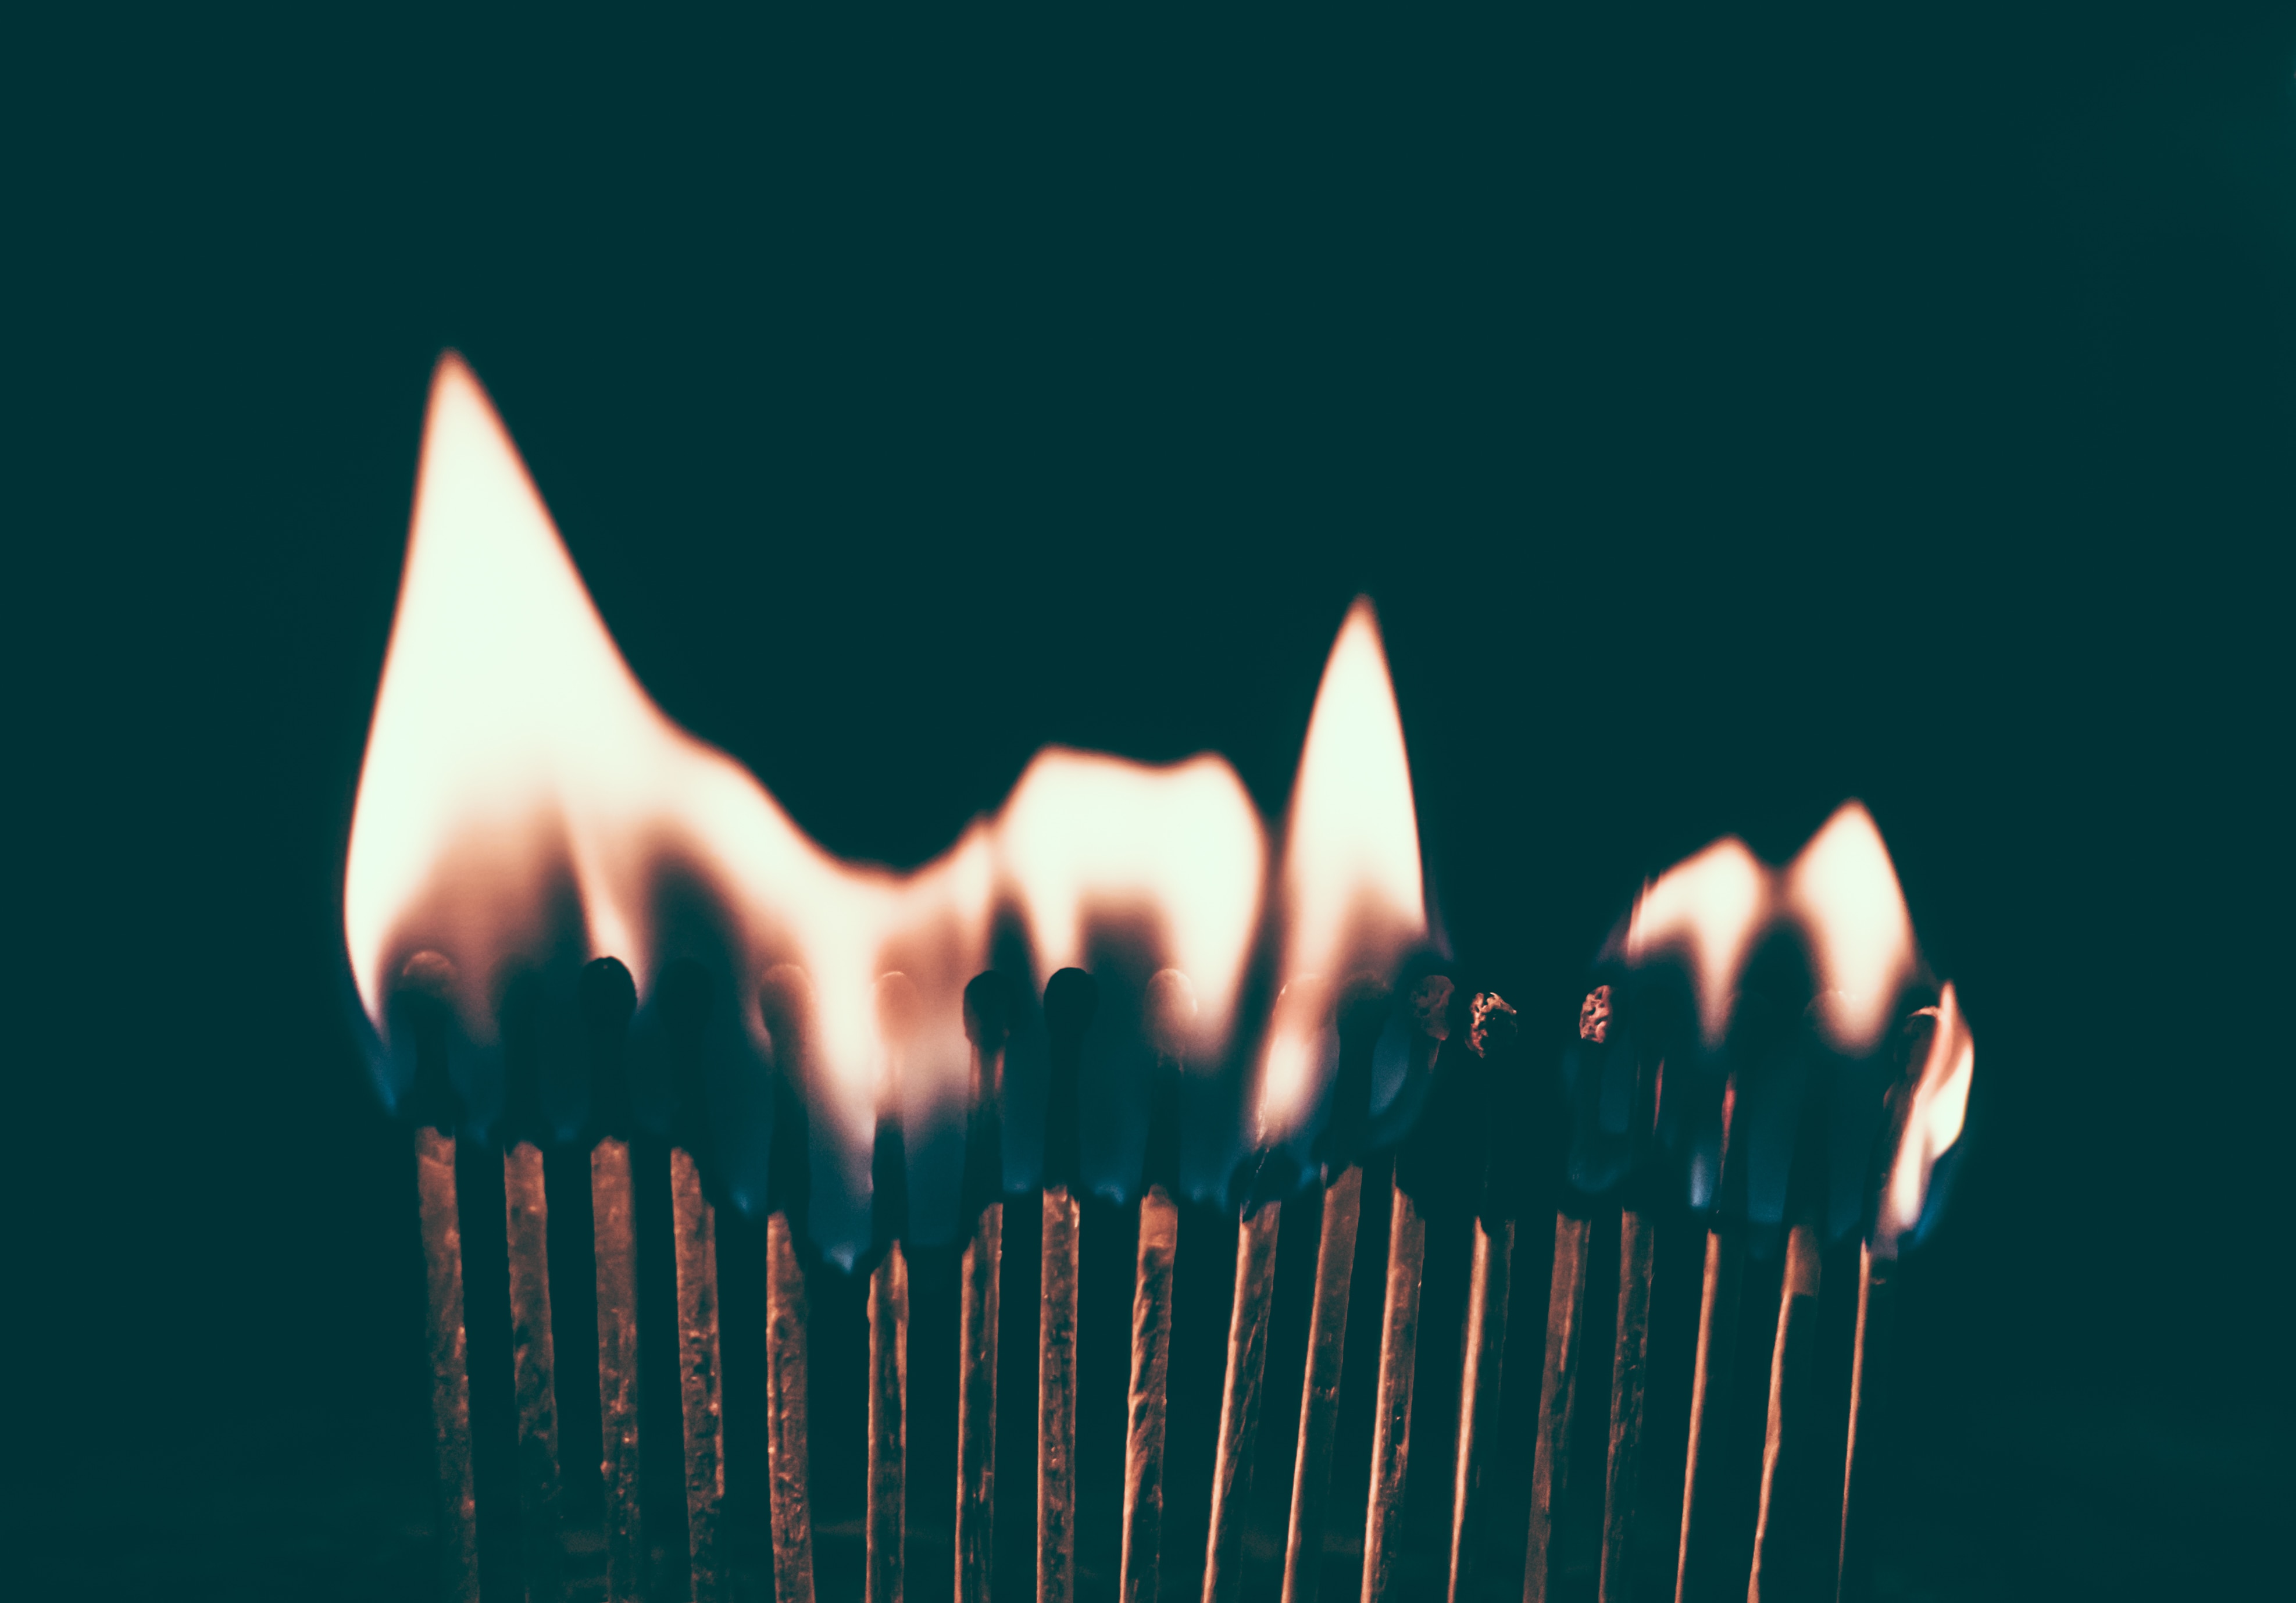 photograph of line of flaming match sticks